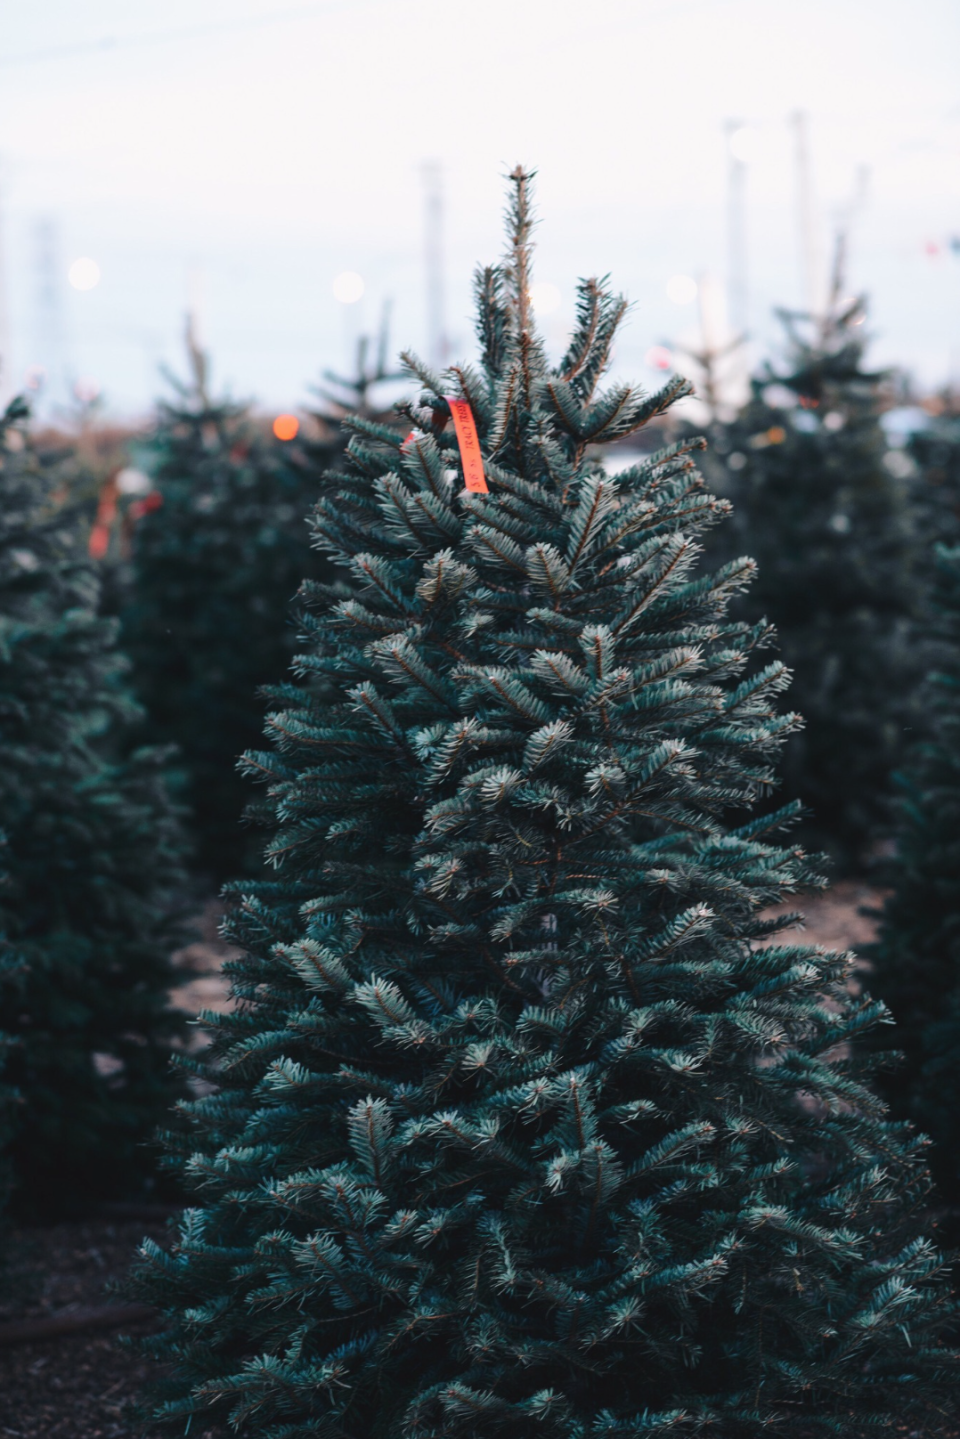 A tree in the middle of rows of christmas trees.